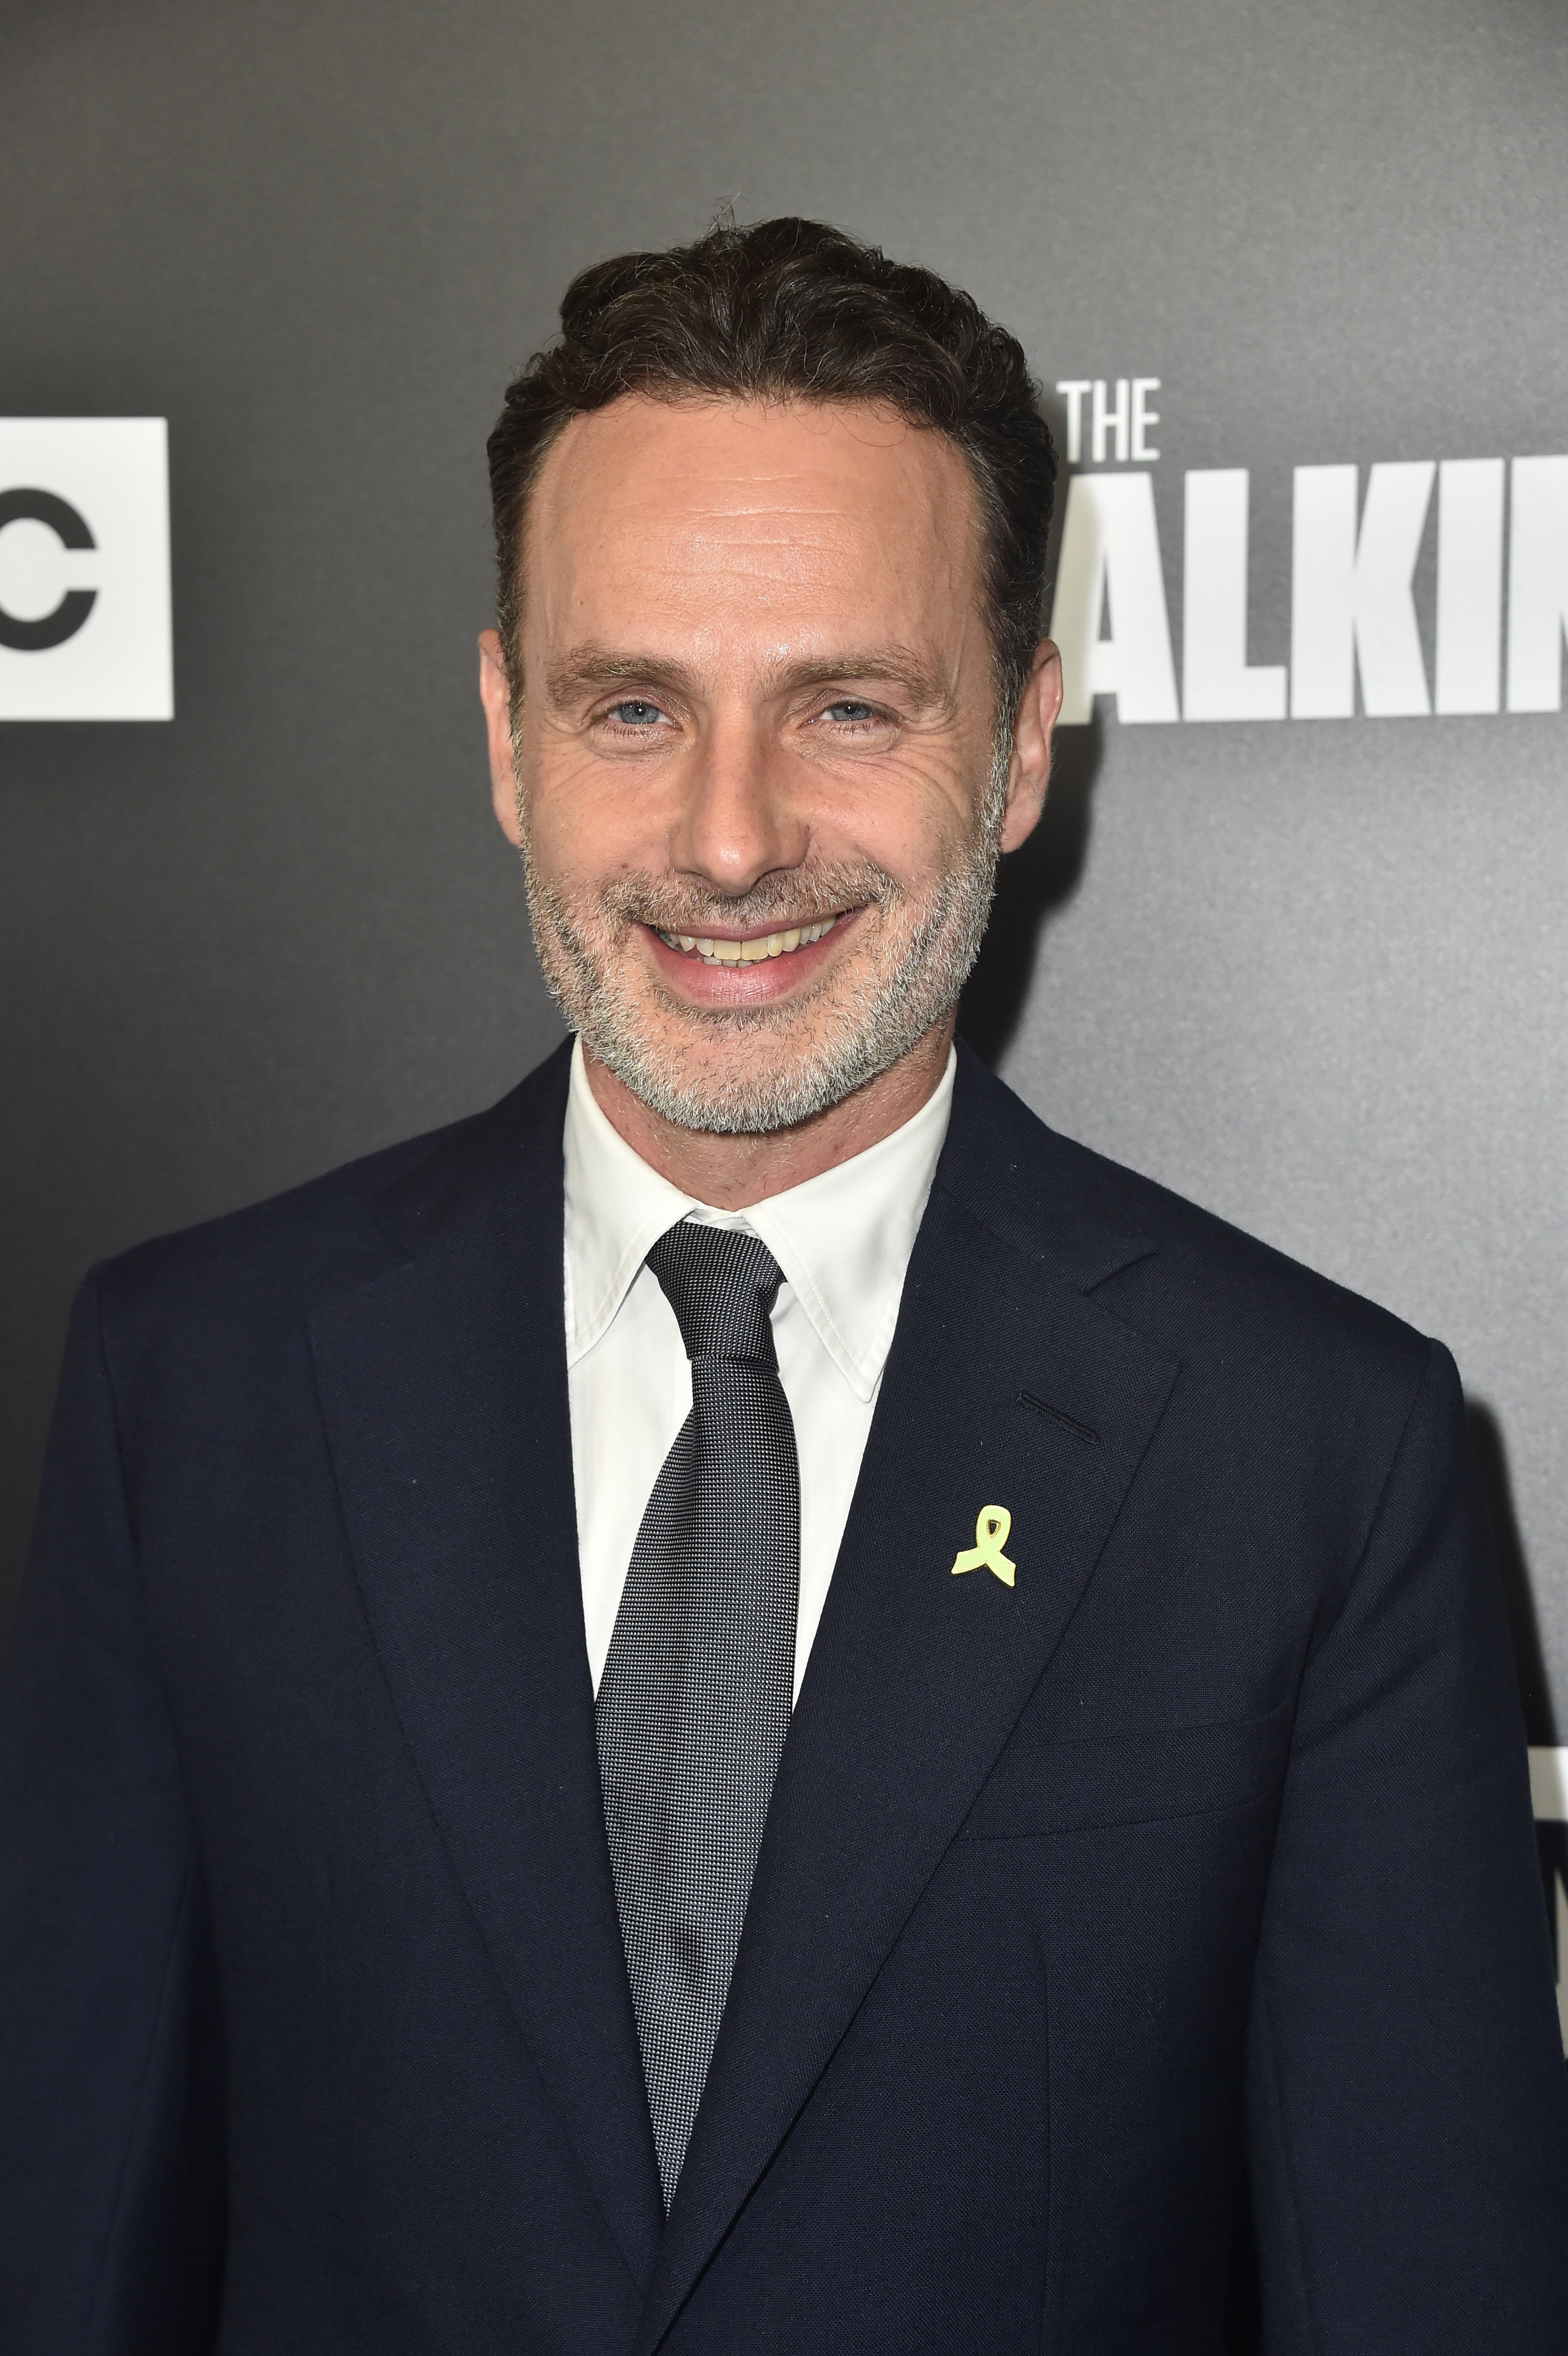 Andrew Lincoln at the Los Angeles premiere of "The Walking Dead" Season 9 on September 27, 2018 | Source: Getty Images